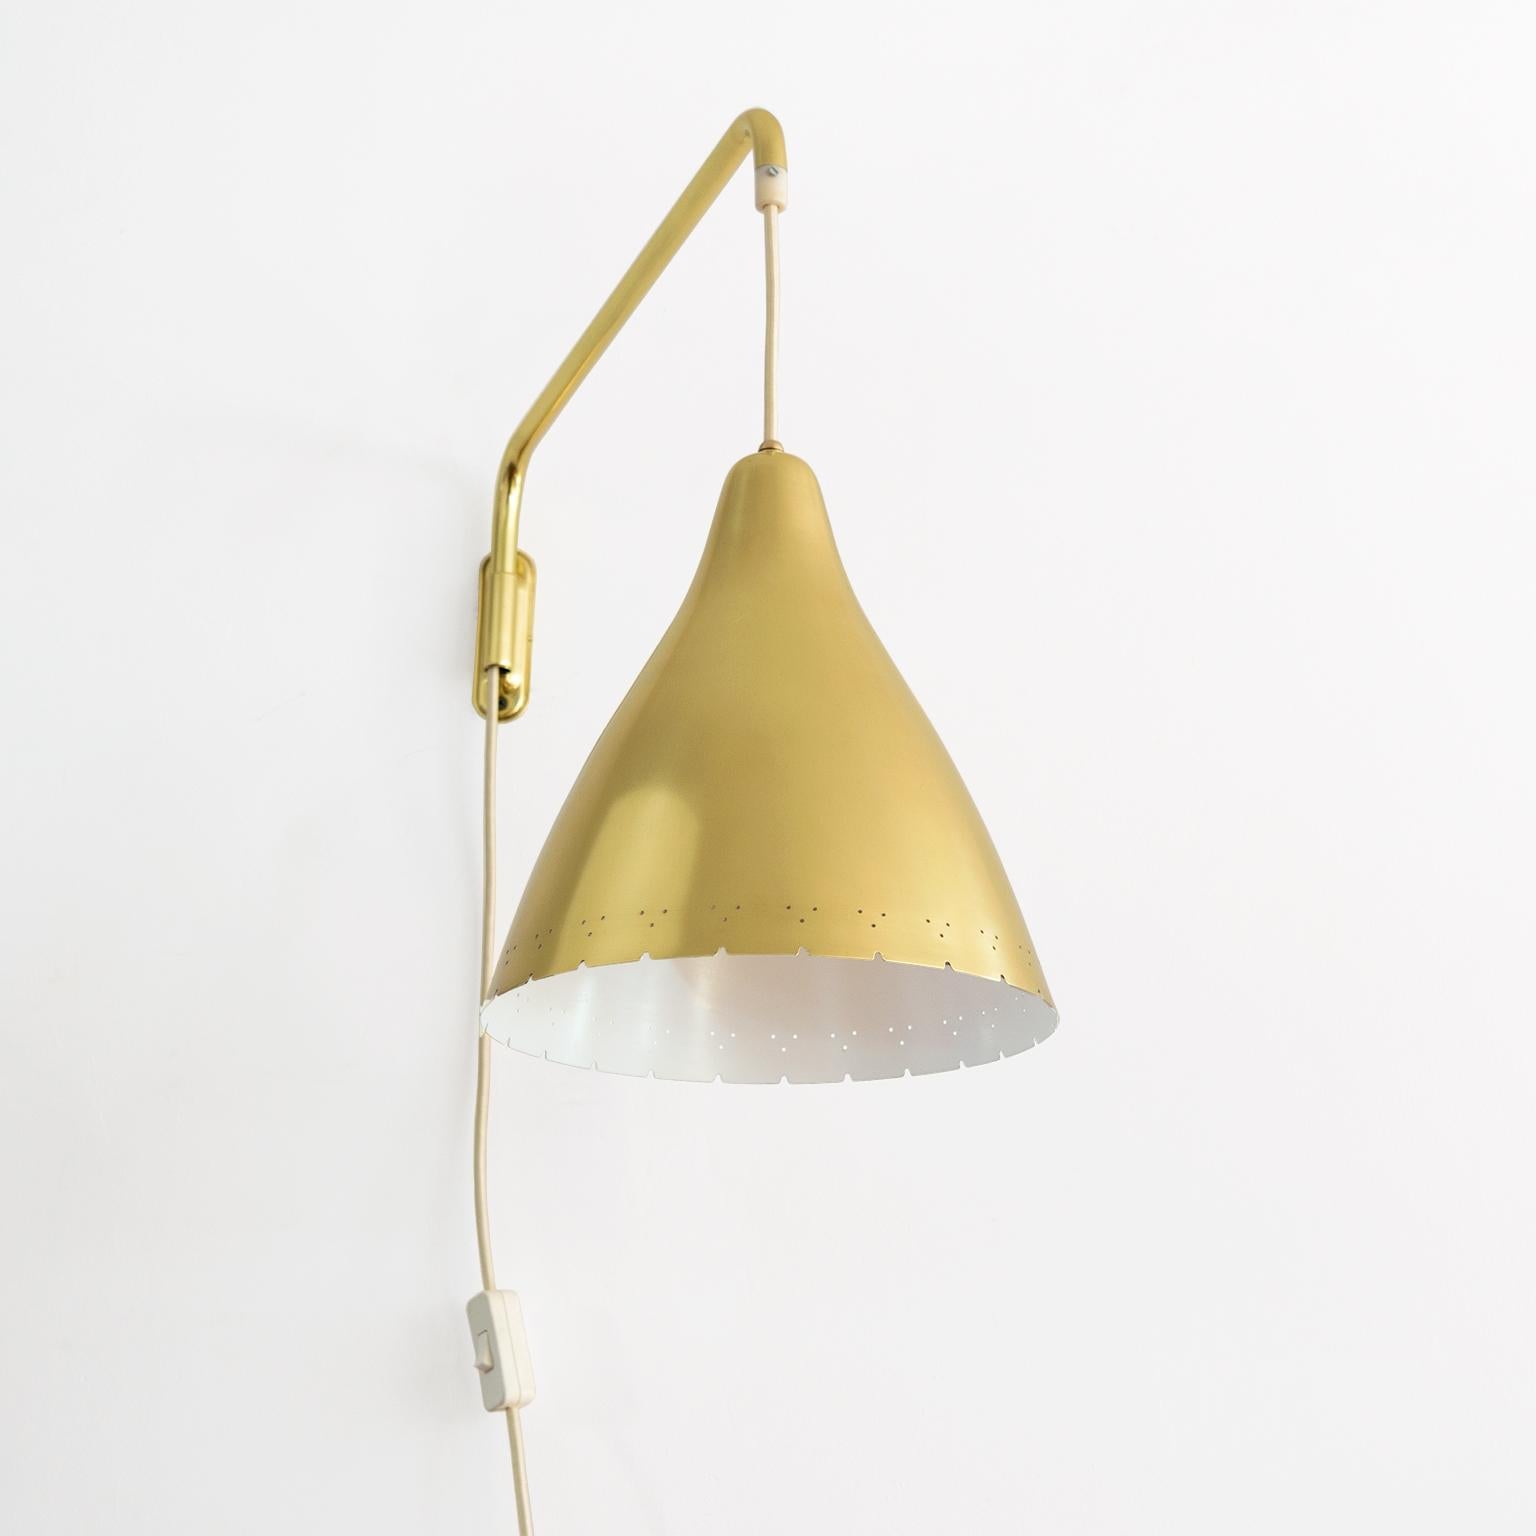 Lisa Johansson-Pape, Scandinavian Modern wall mounted swing arm lamp with pierced lacquered brass shade on a swing arm. Newly restored, re-polished and lacquered brass, the shade may be raised and lowered. The lamp has been wired for the USA with